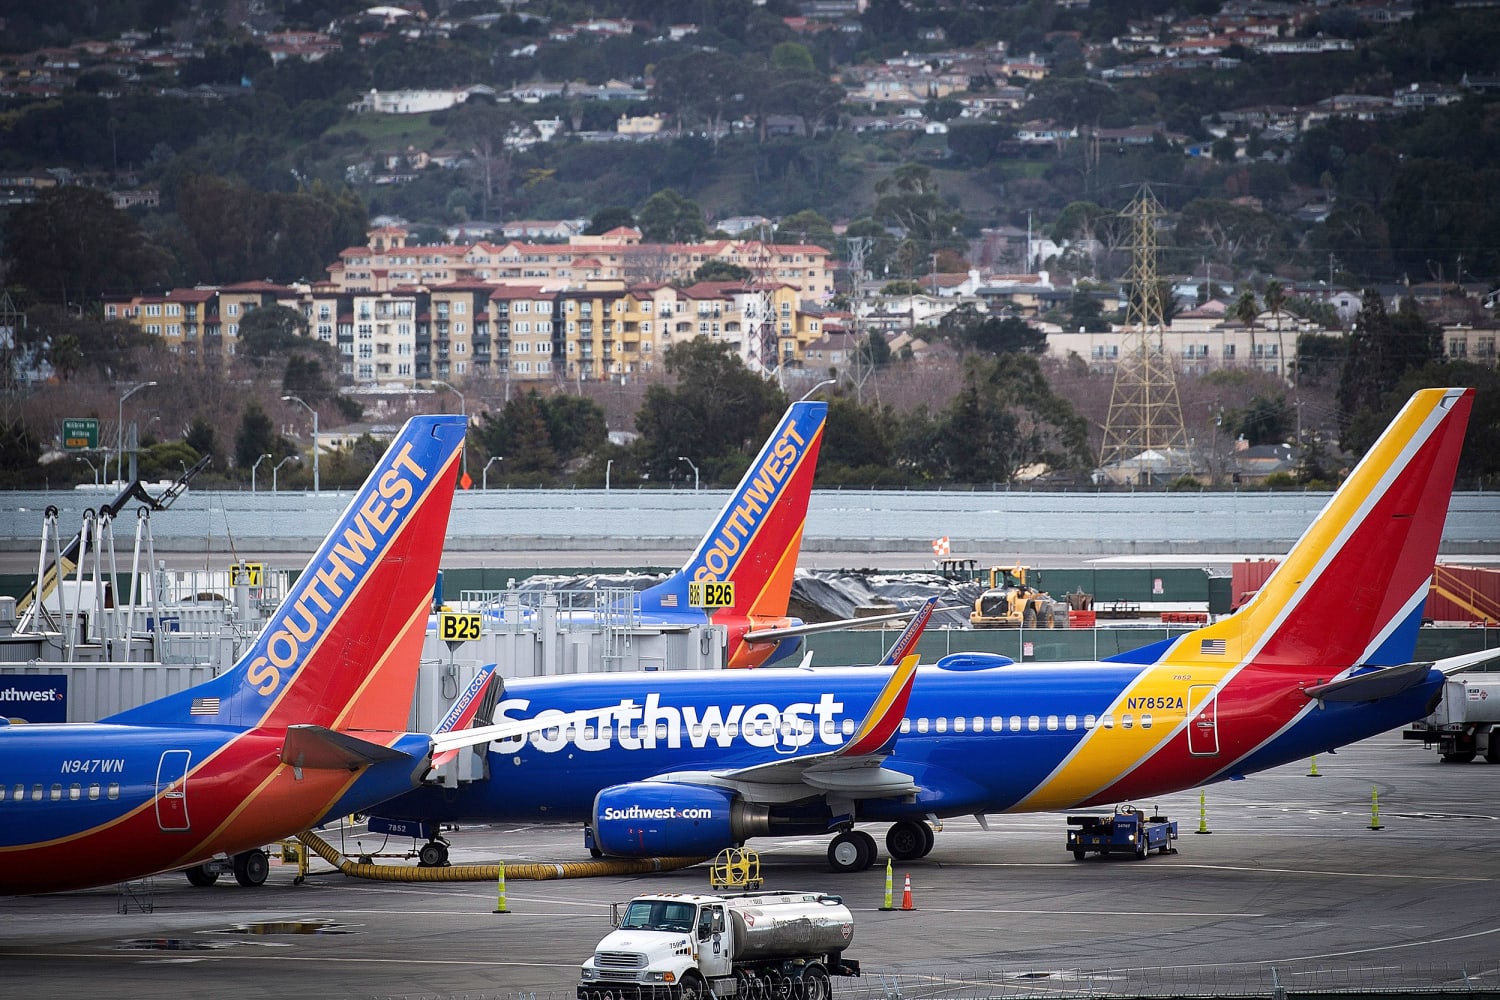 2 planes aborted landings when a Southwest jet taxied across their runways in San Francisco